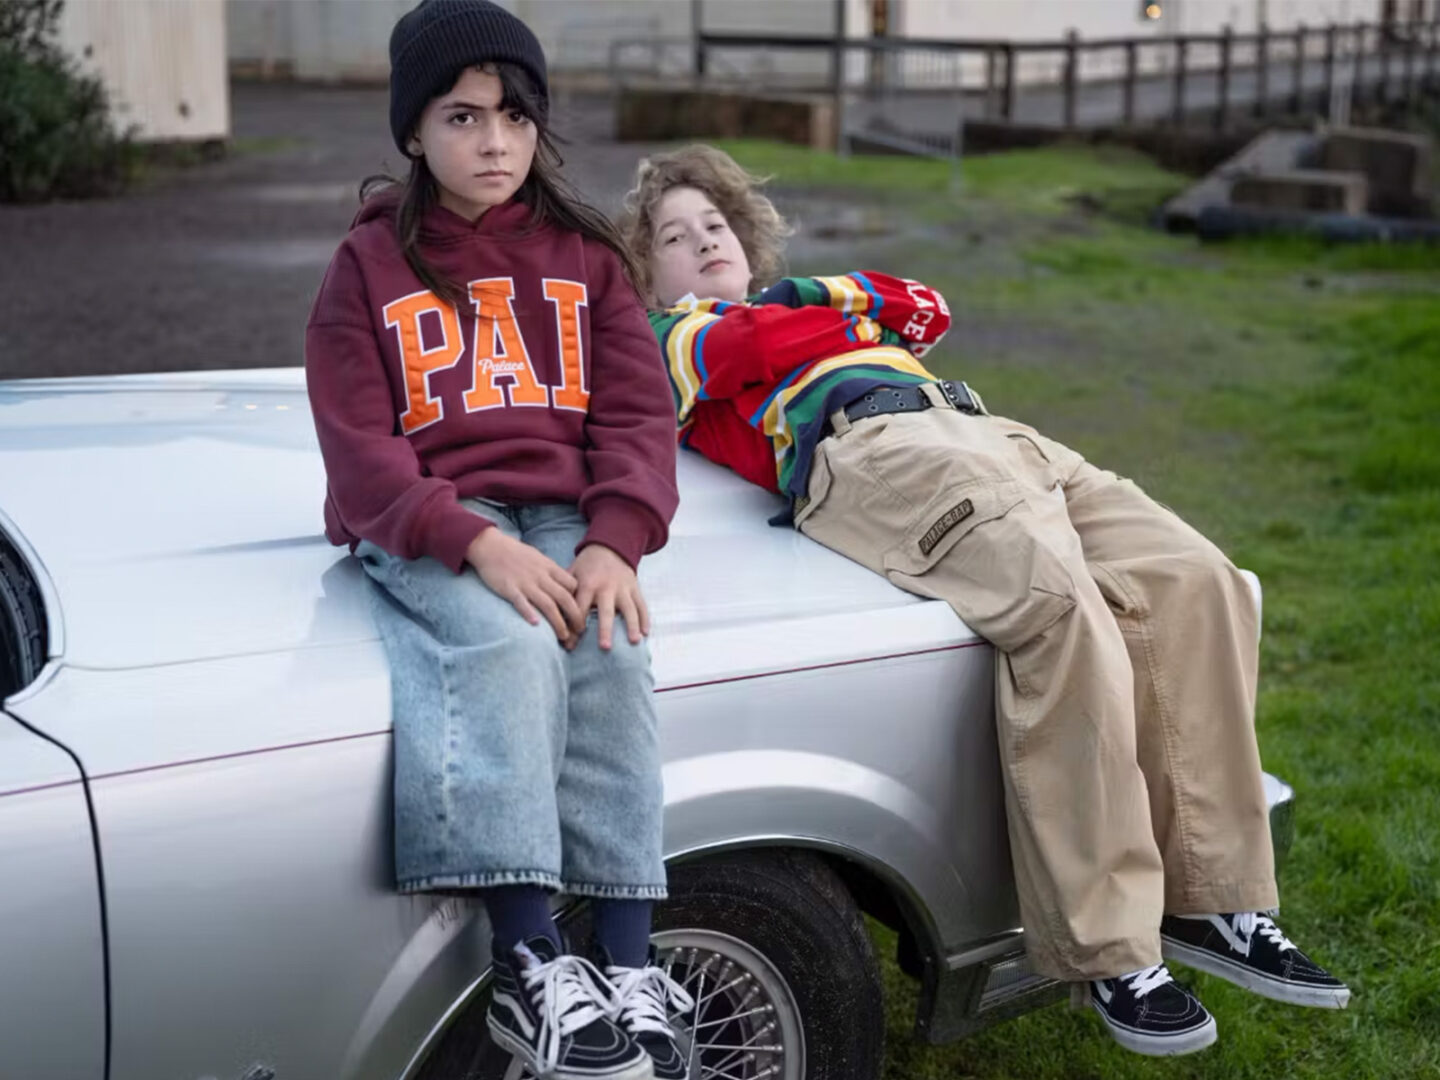 Palace and Gap team up to dress the next skaters’ generation